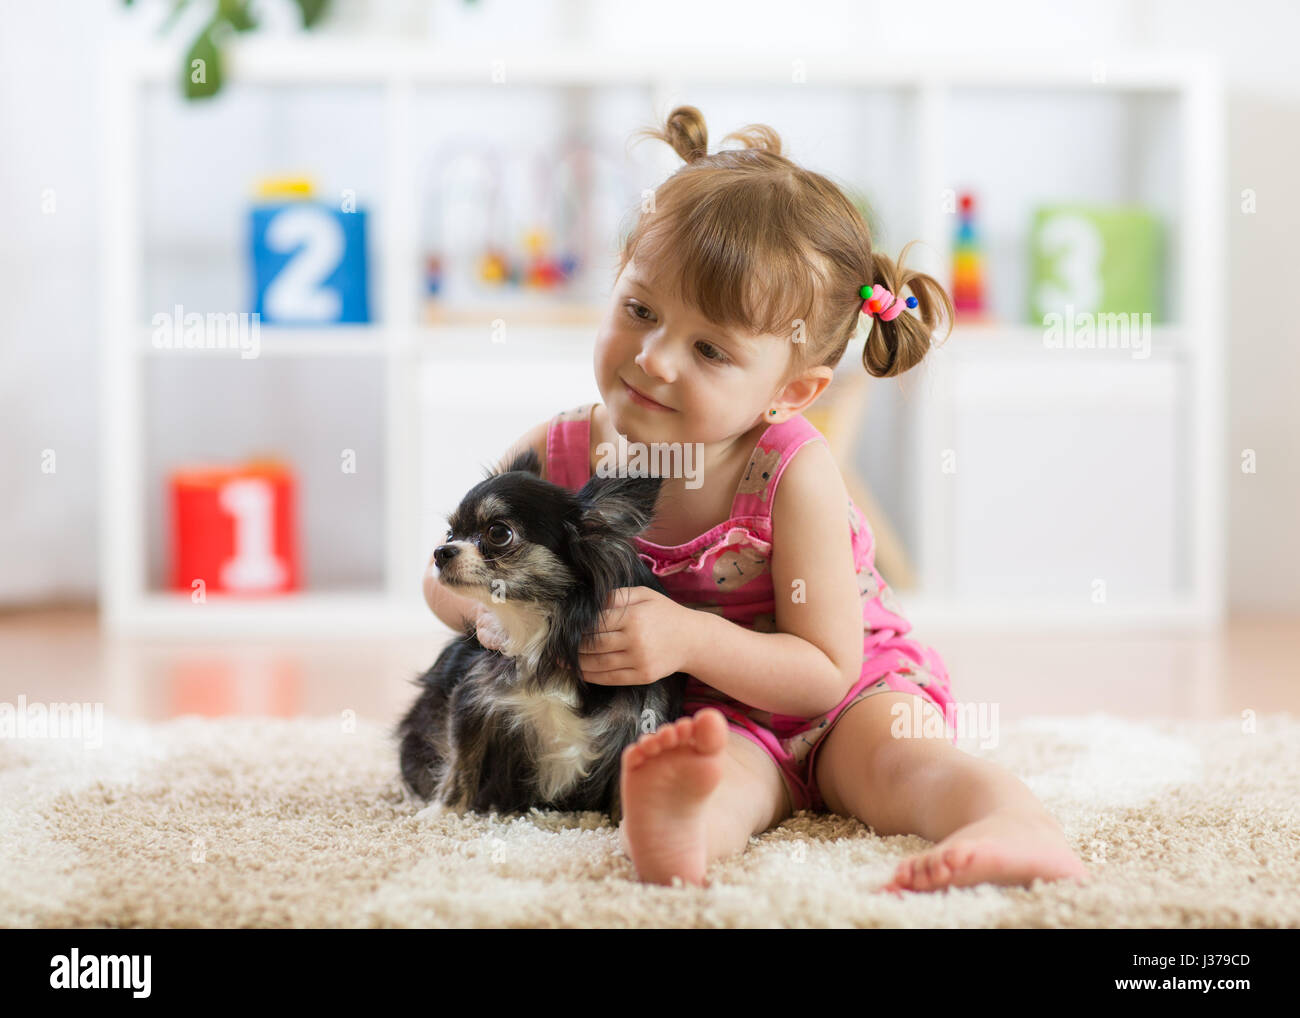 kd and dog play in a nursery Stock Photo